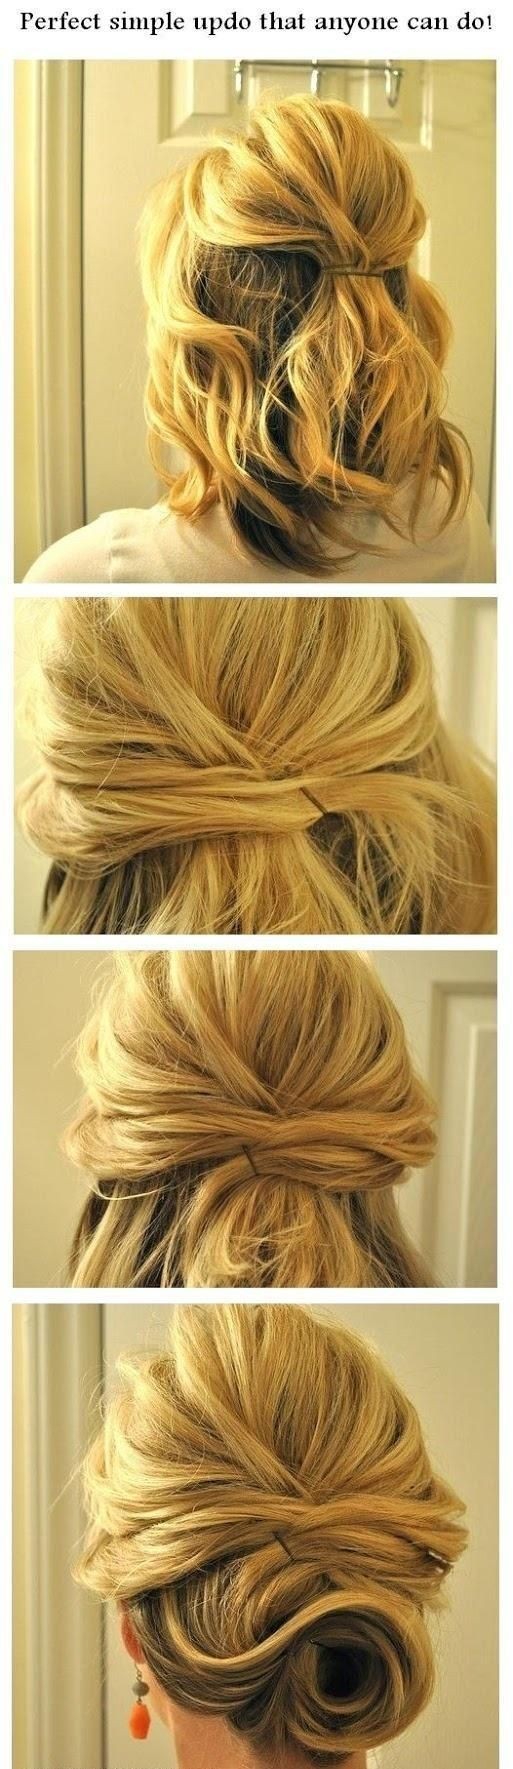 Perfect Simple Updo Hairstyle Tutorial